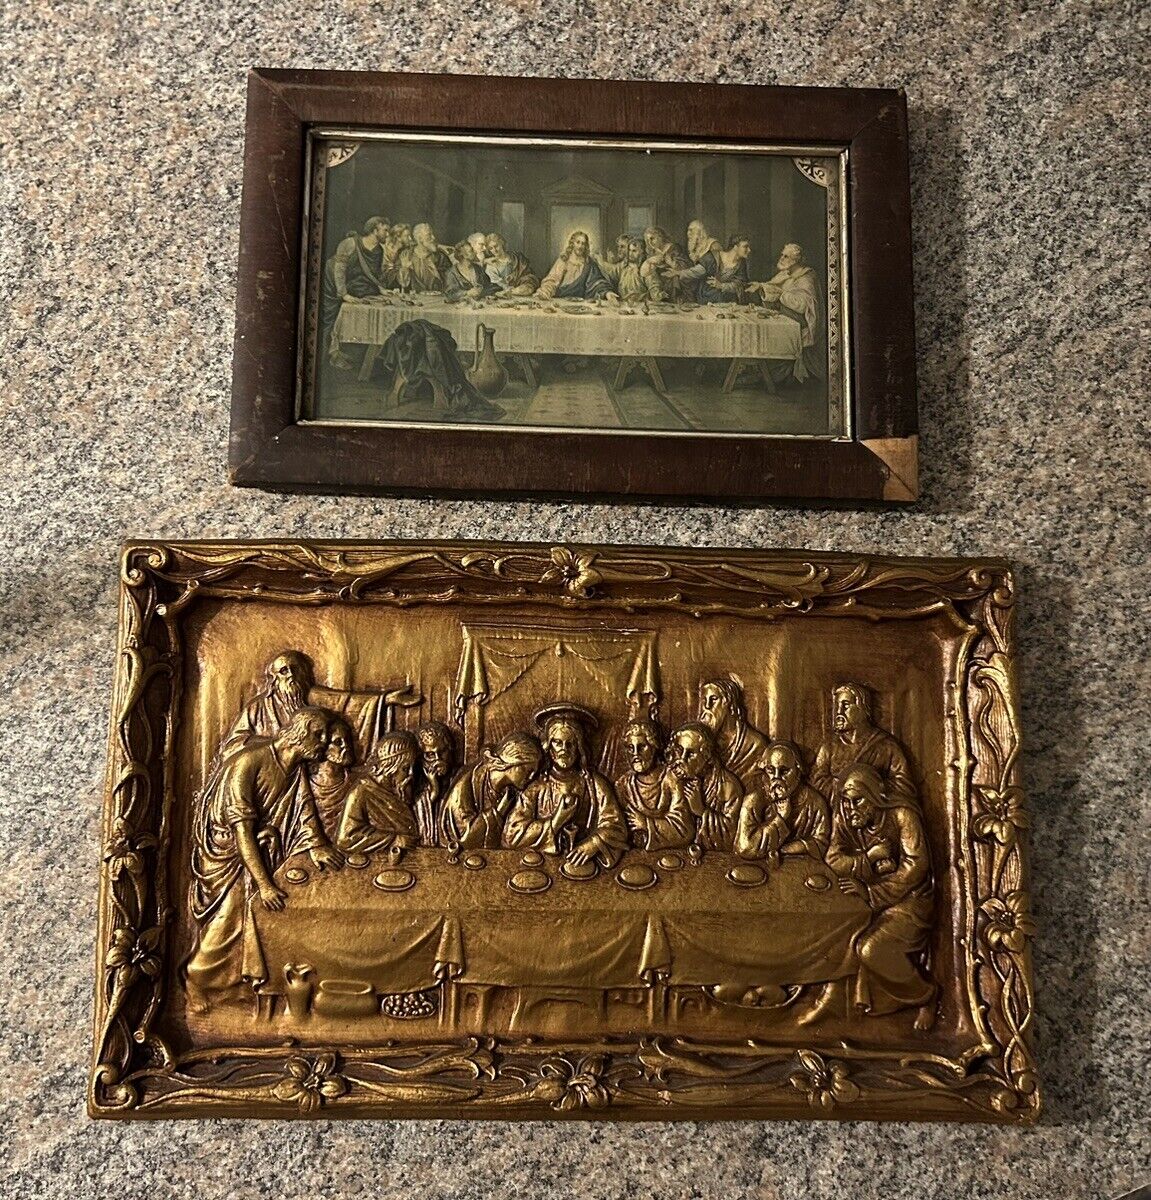 VINTAGE “THE LAST SUPPER” WOOD FRAMED PICTURE AND ARTISTIC PLAQUE COMBO DEAL